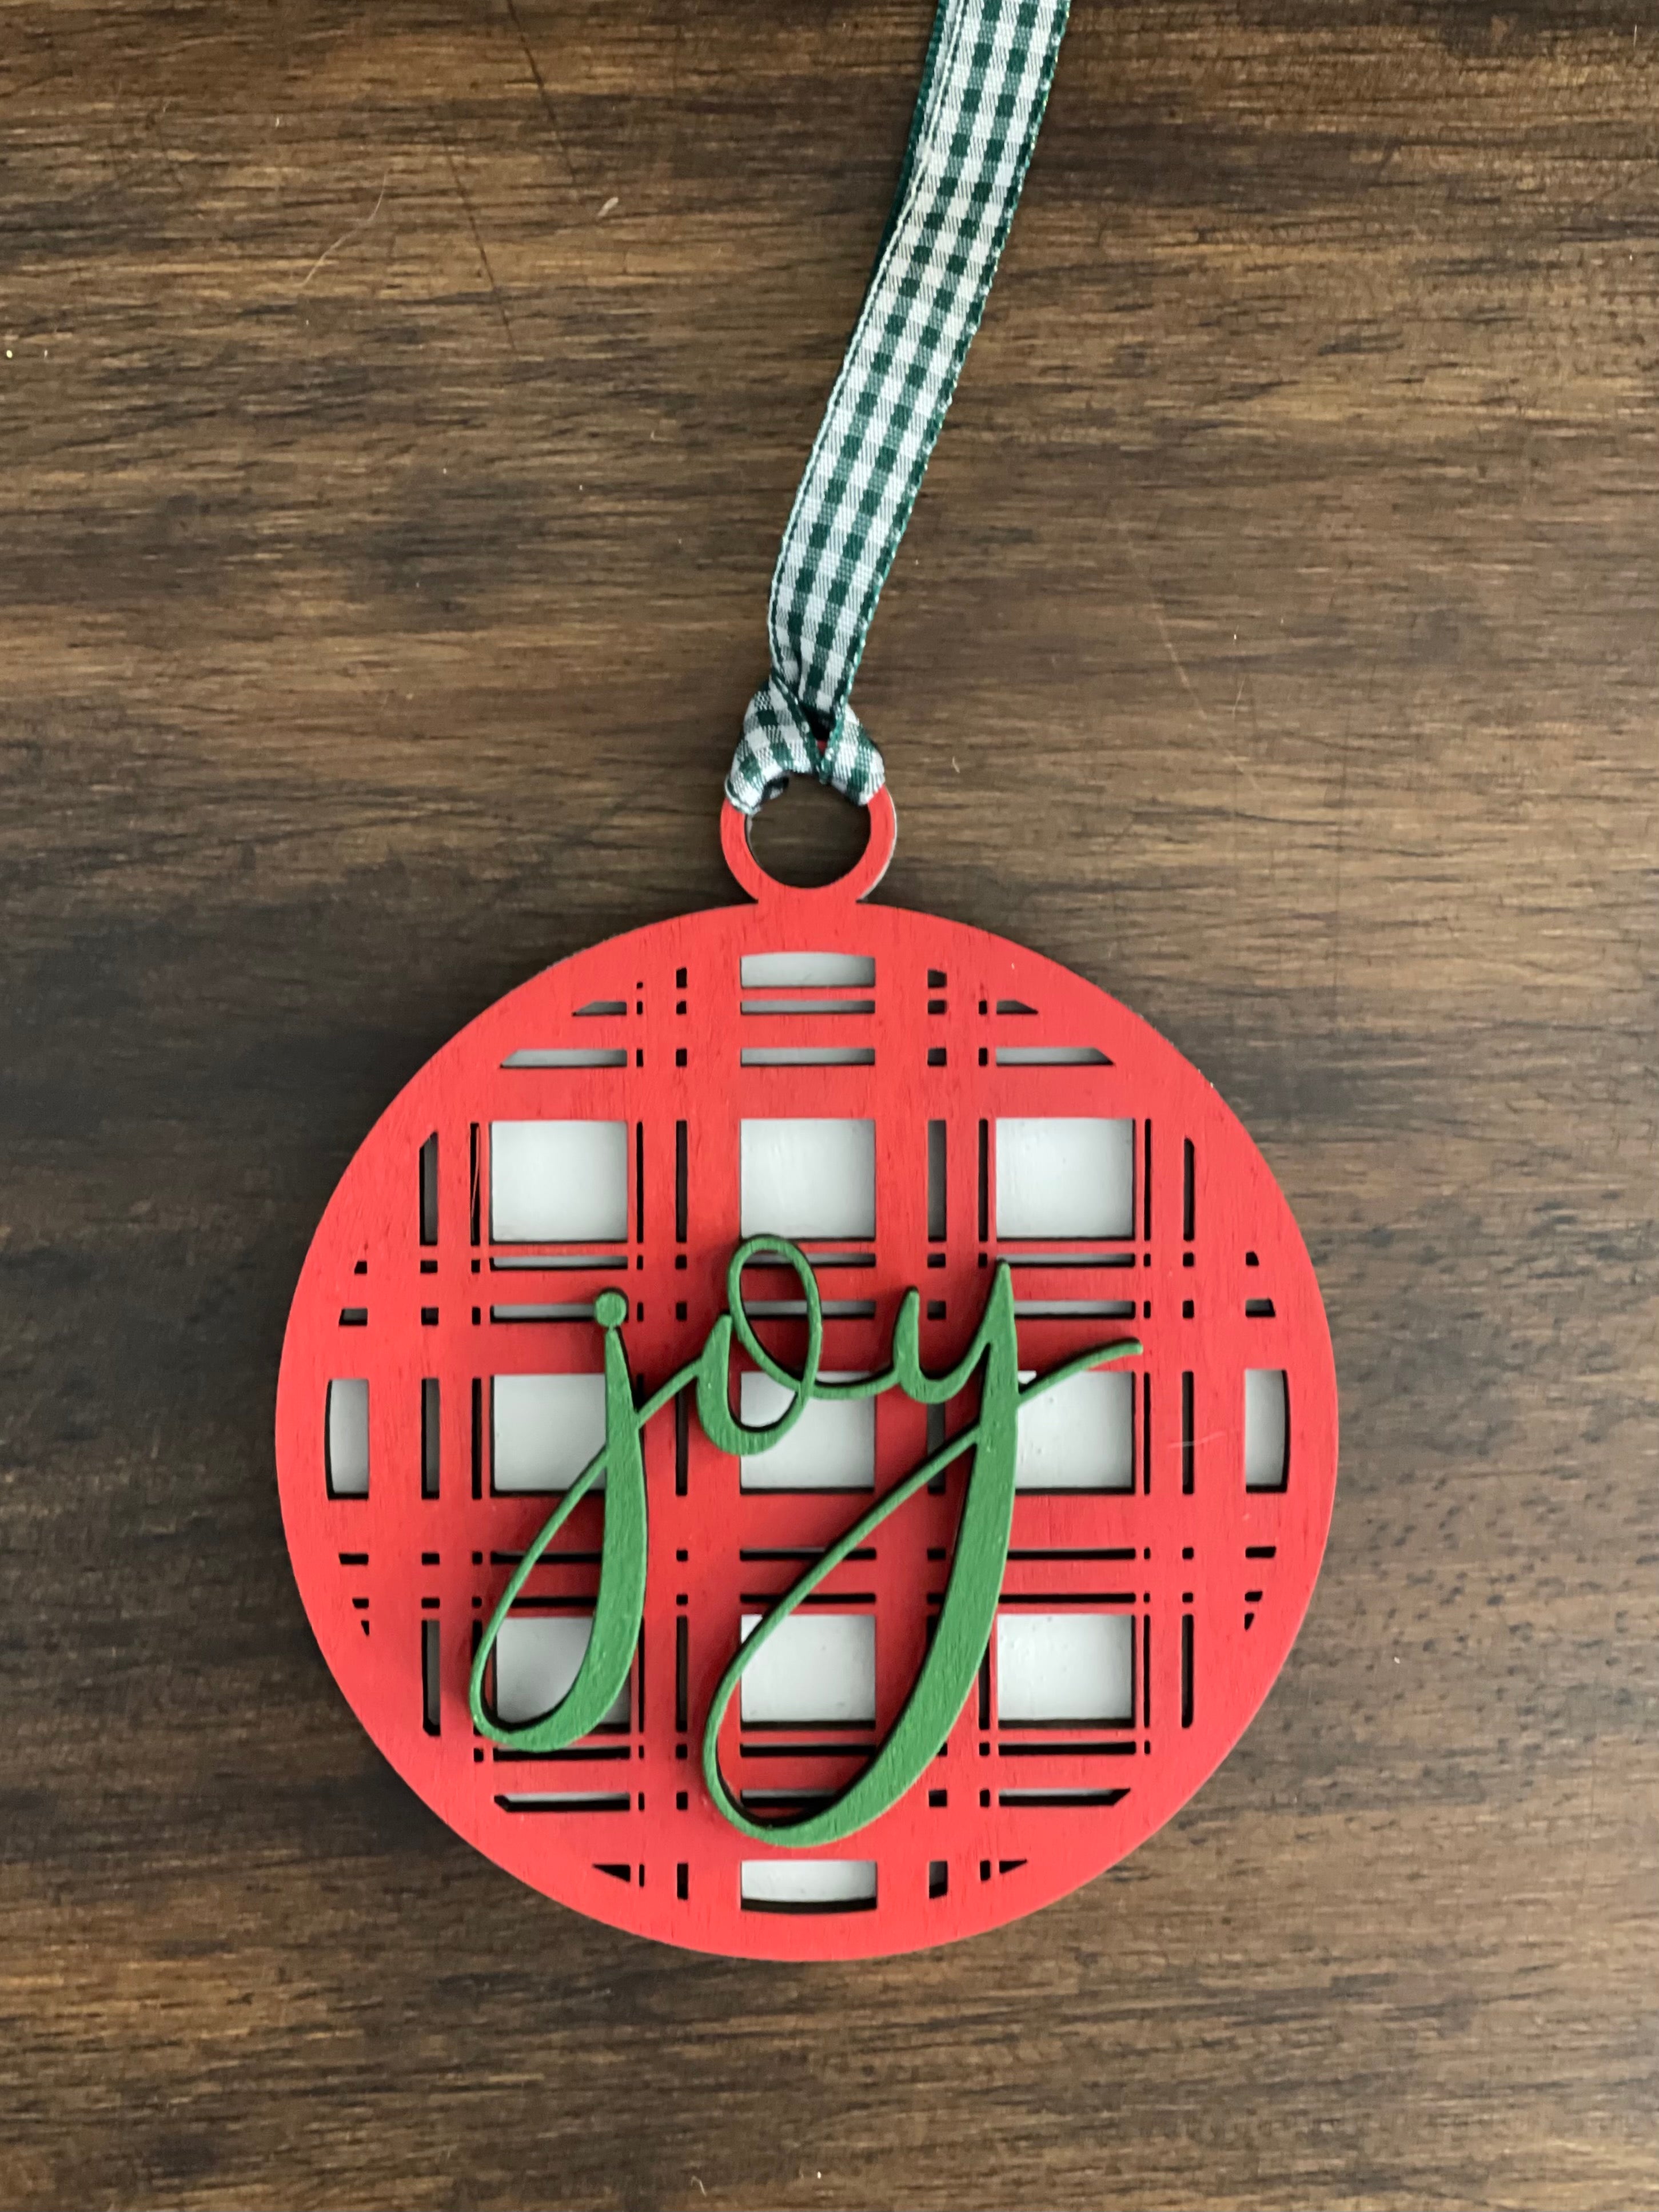 This is the red plaid joy ornament without a bow.